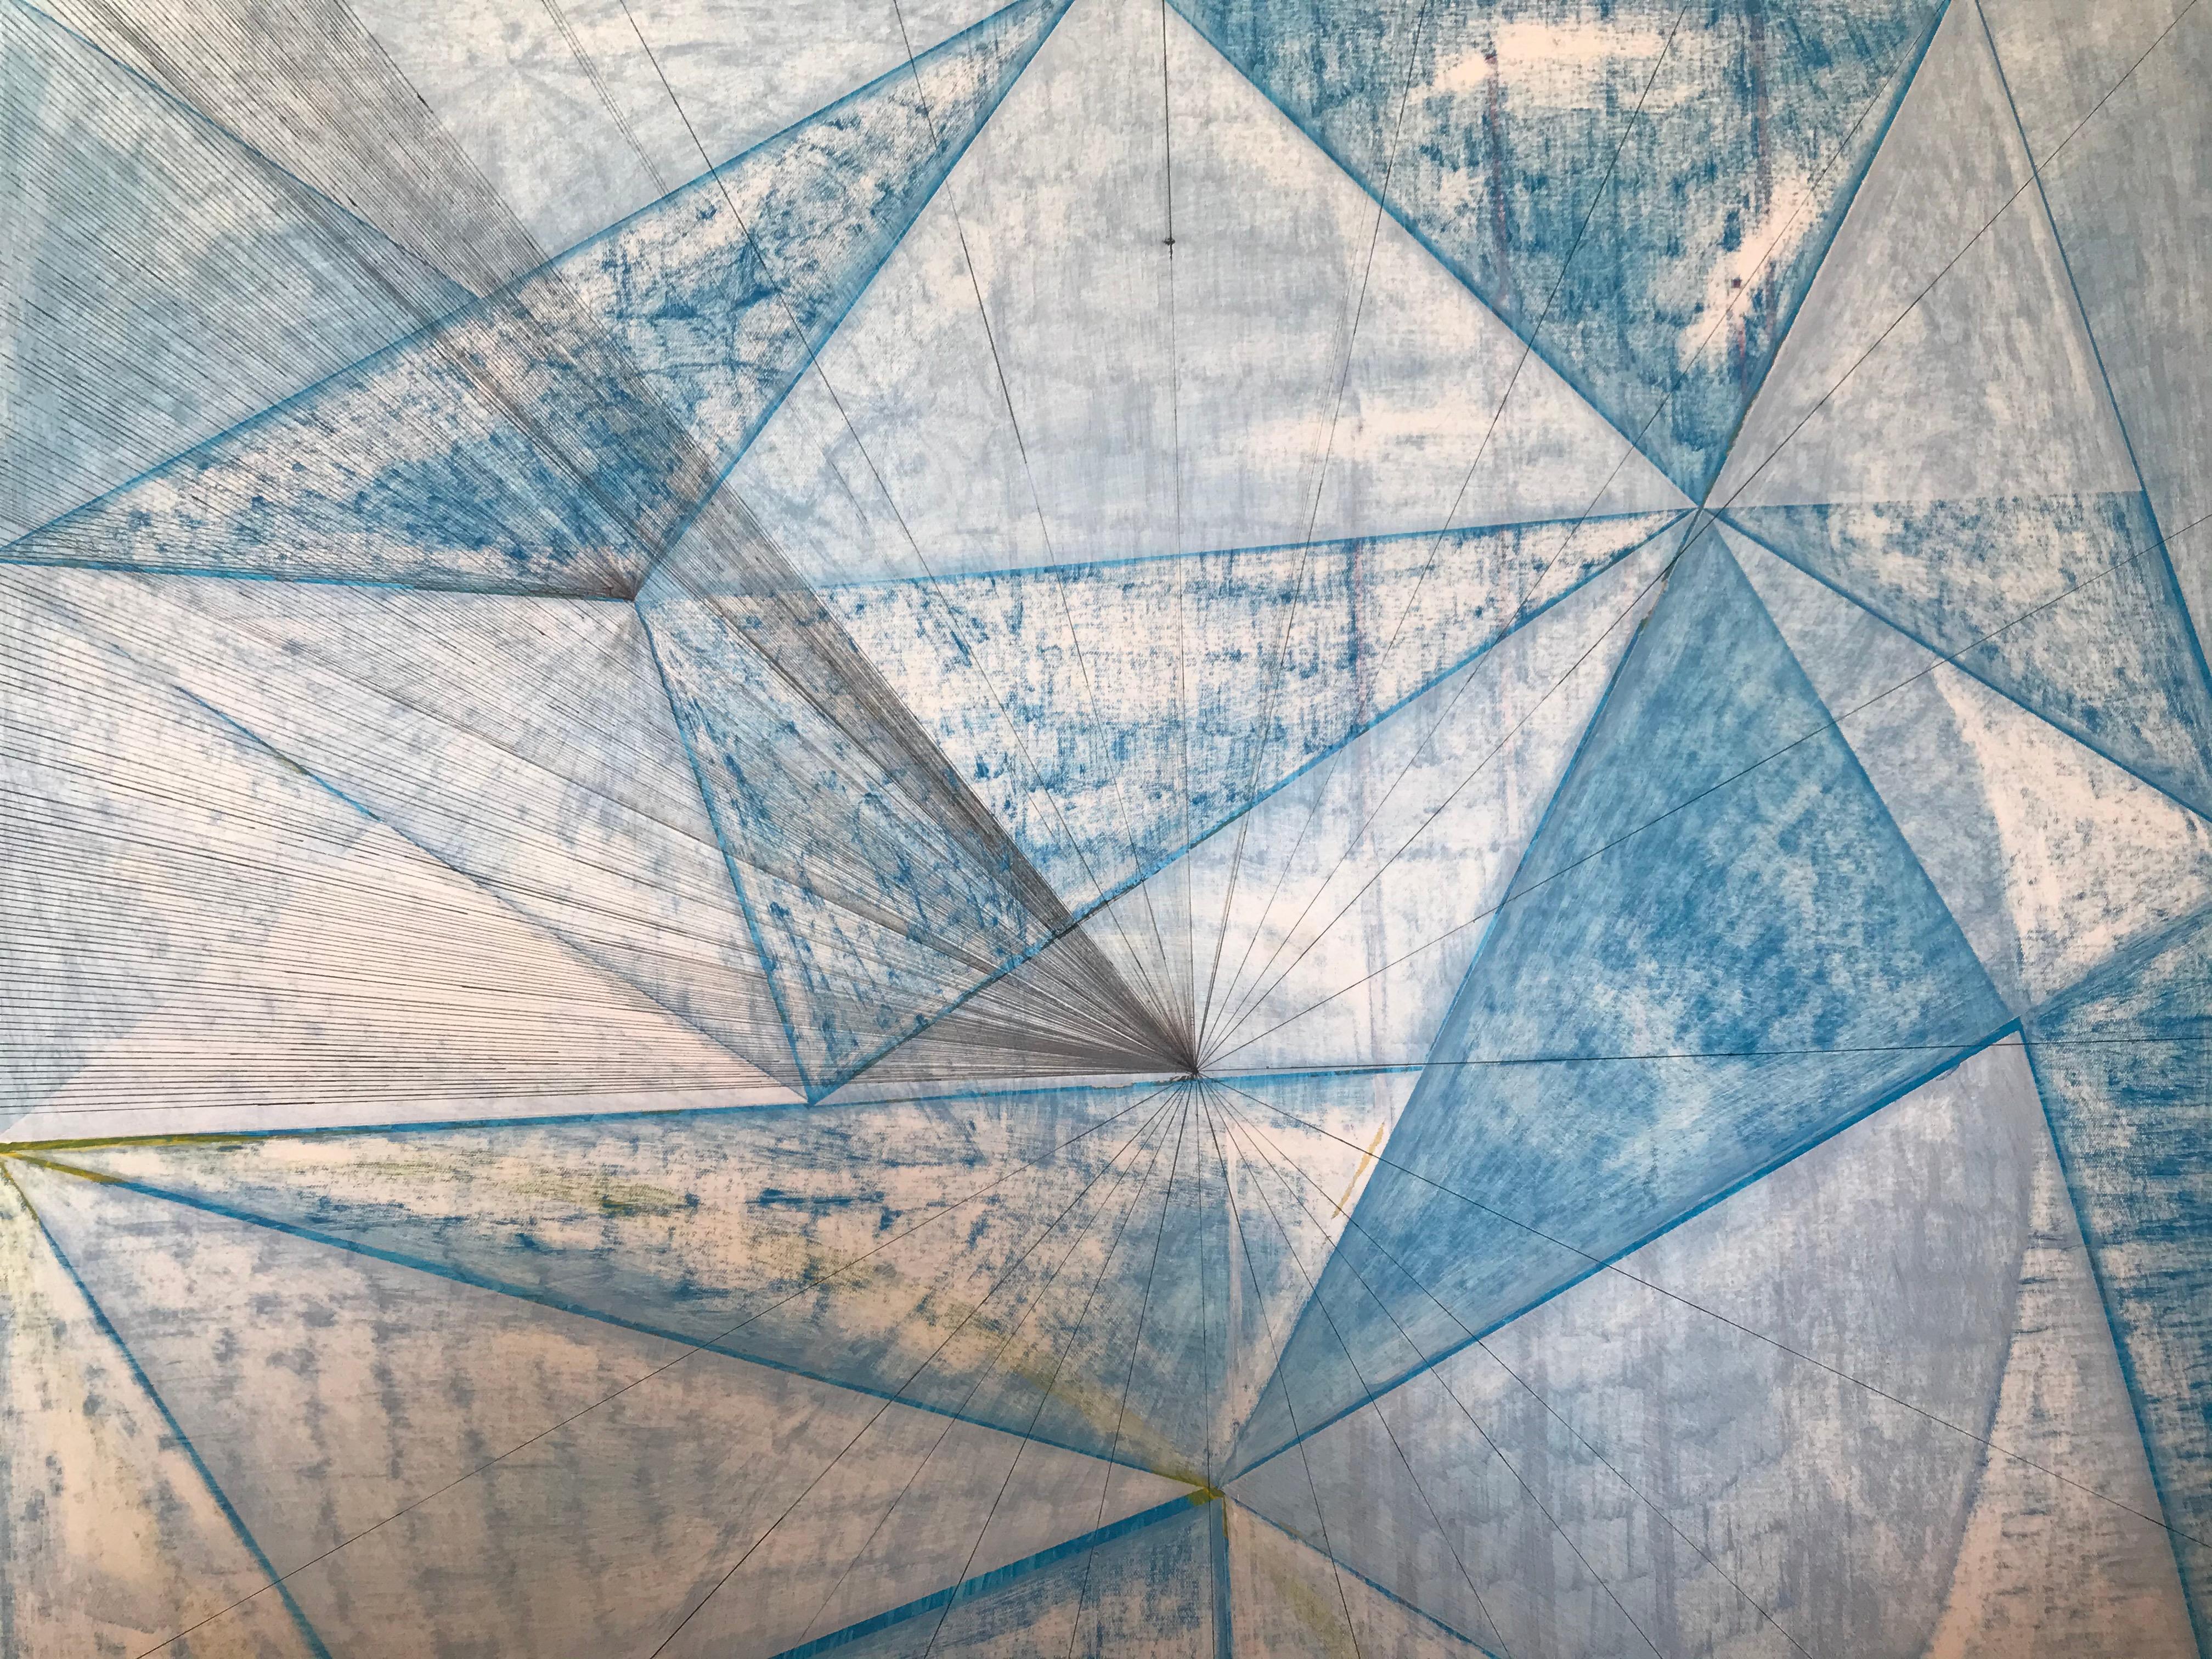 This blue monochrome painting by contemporary artist Mitchel Wright transports us to distant worlds beyond our comprehension. Within his seemingly infinite networks of lines, dots, and crosses, he decodes the recognizable to create something